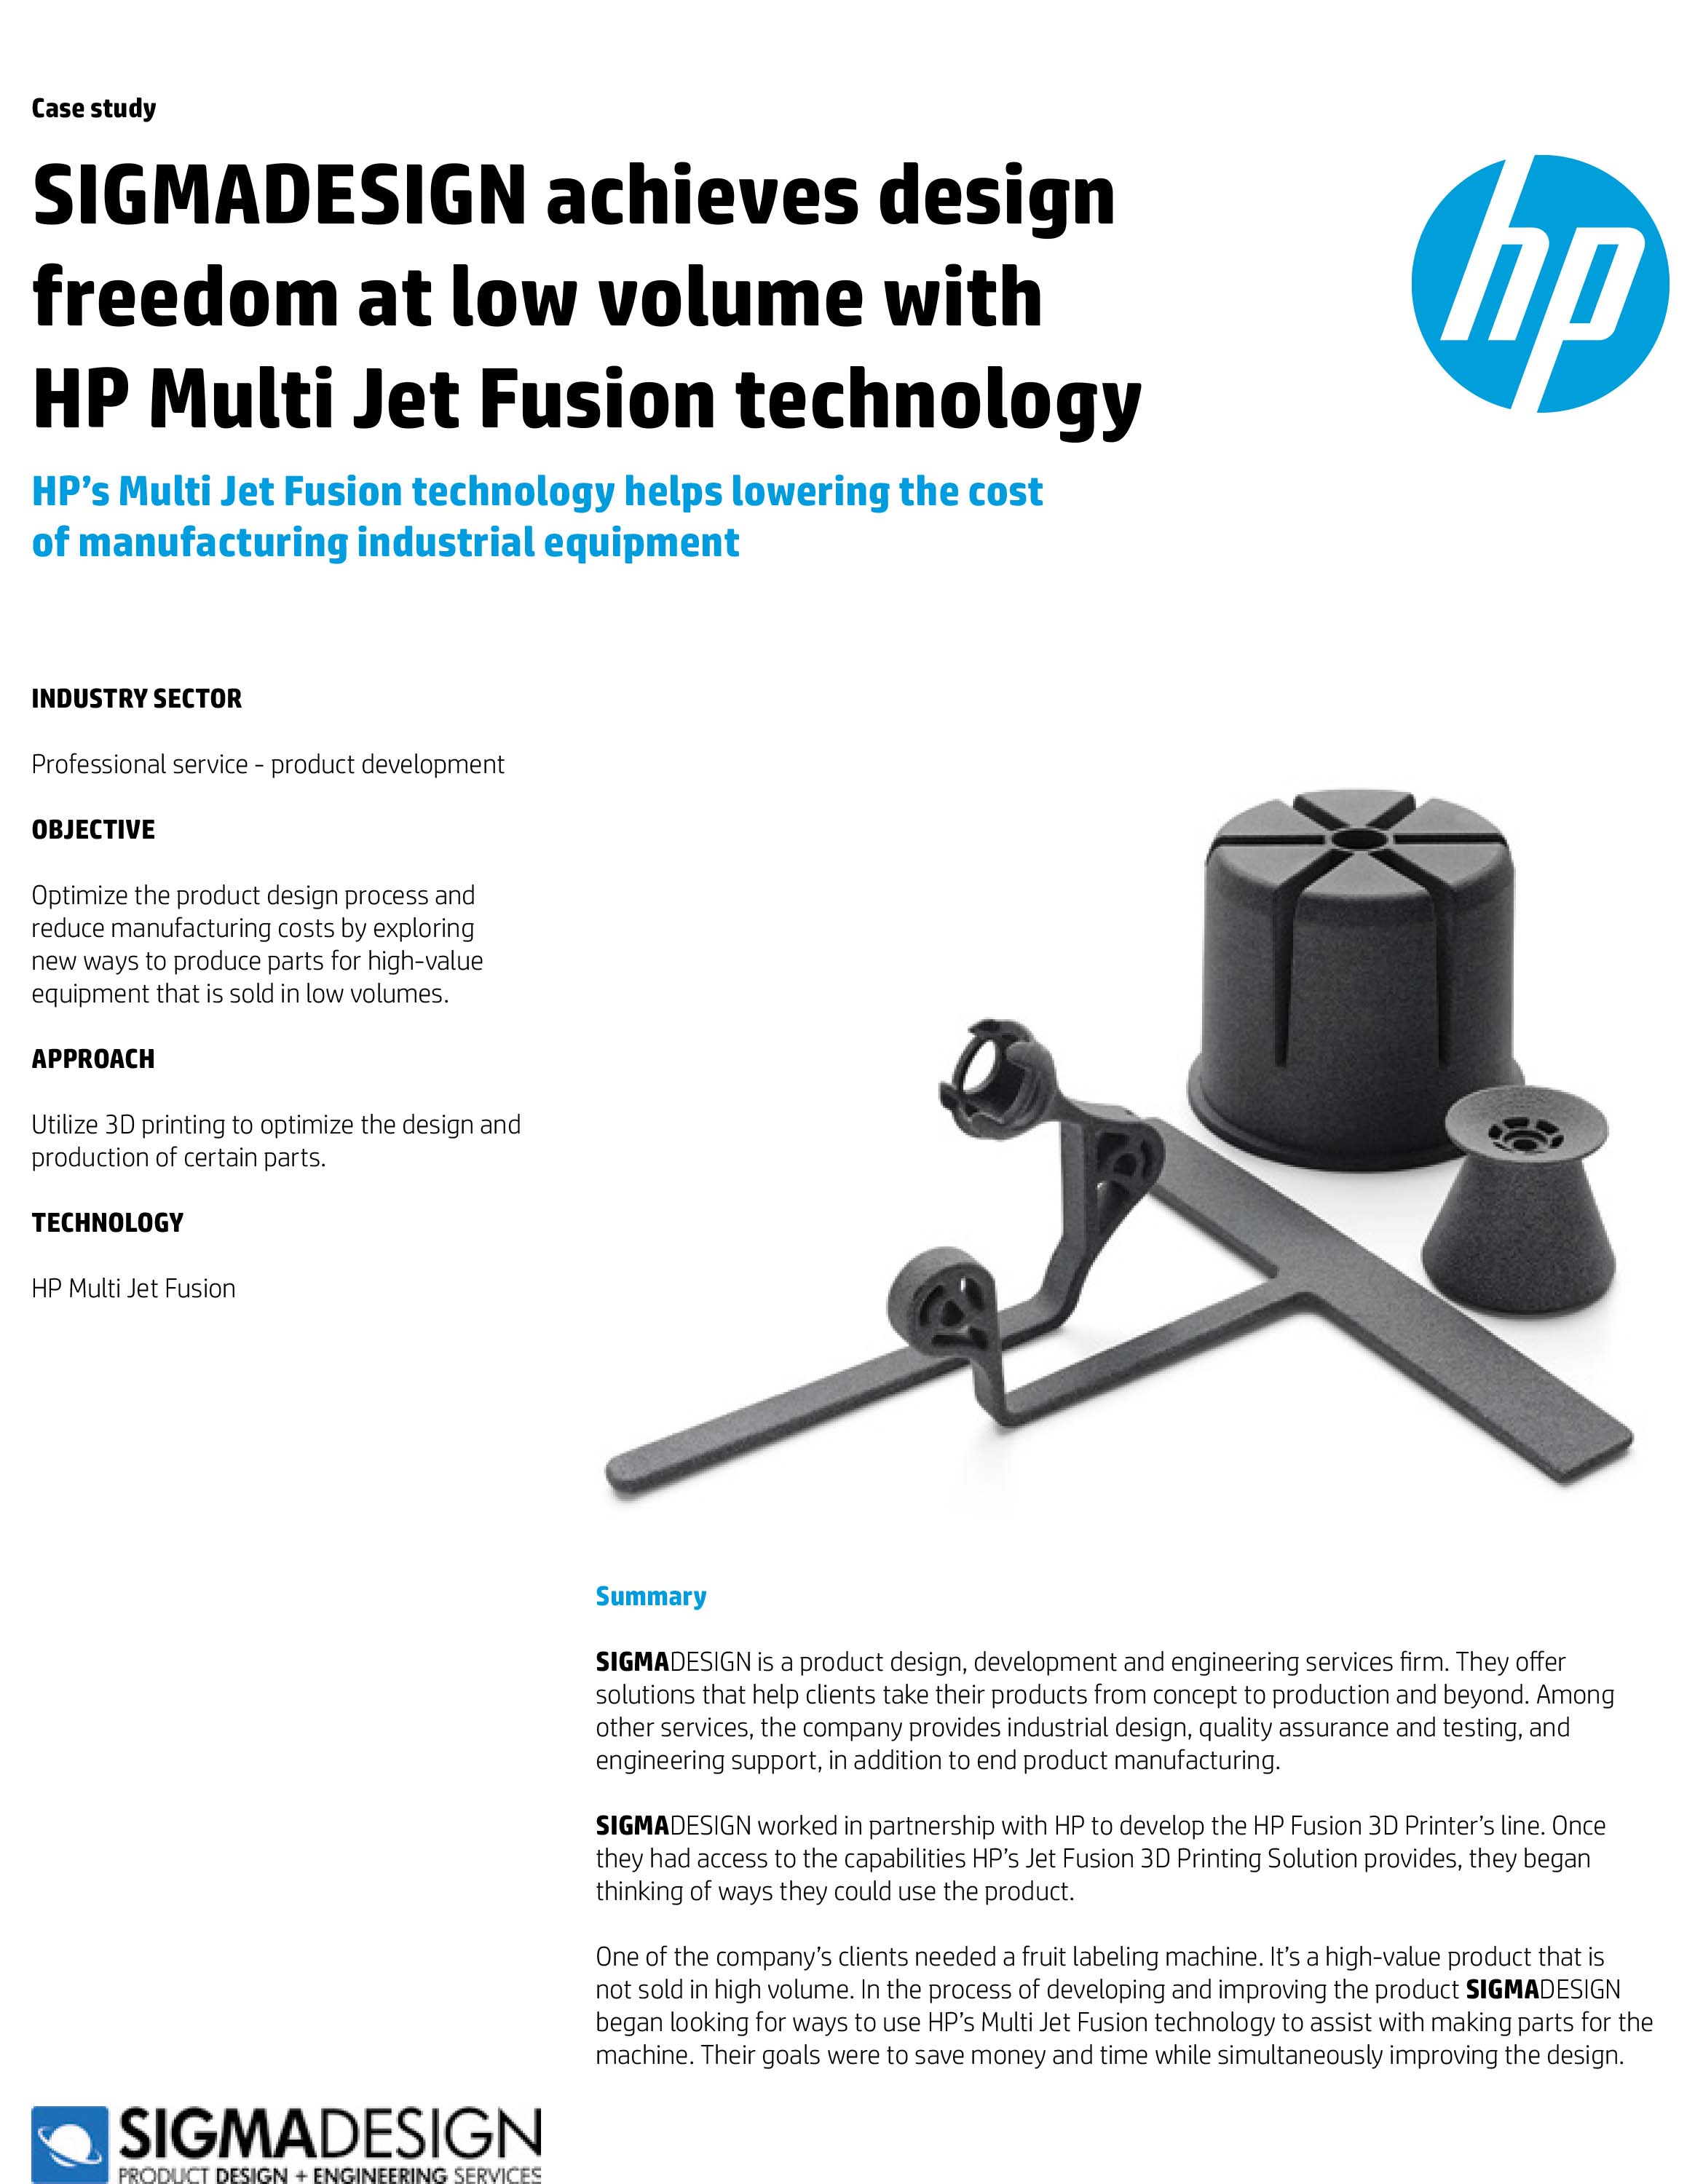 SIGMADESIGN achieves design freedom at low volume with HP Multi Jet Fusion technology